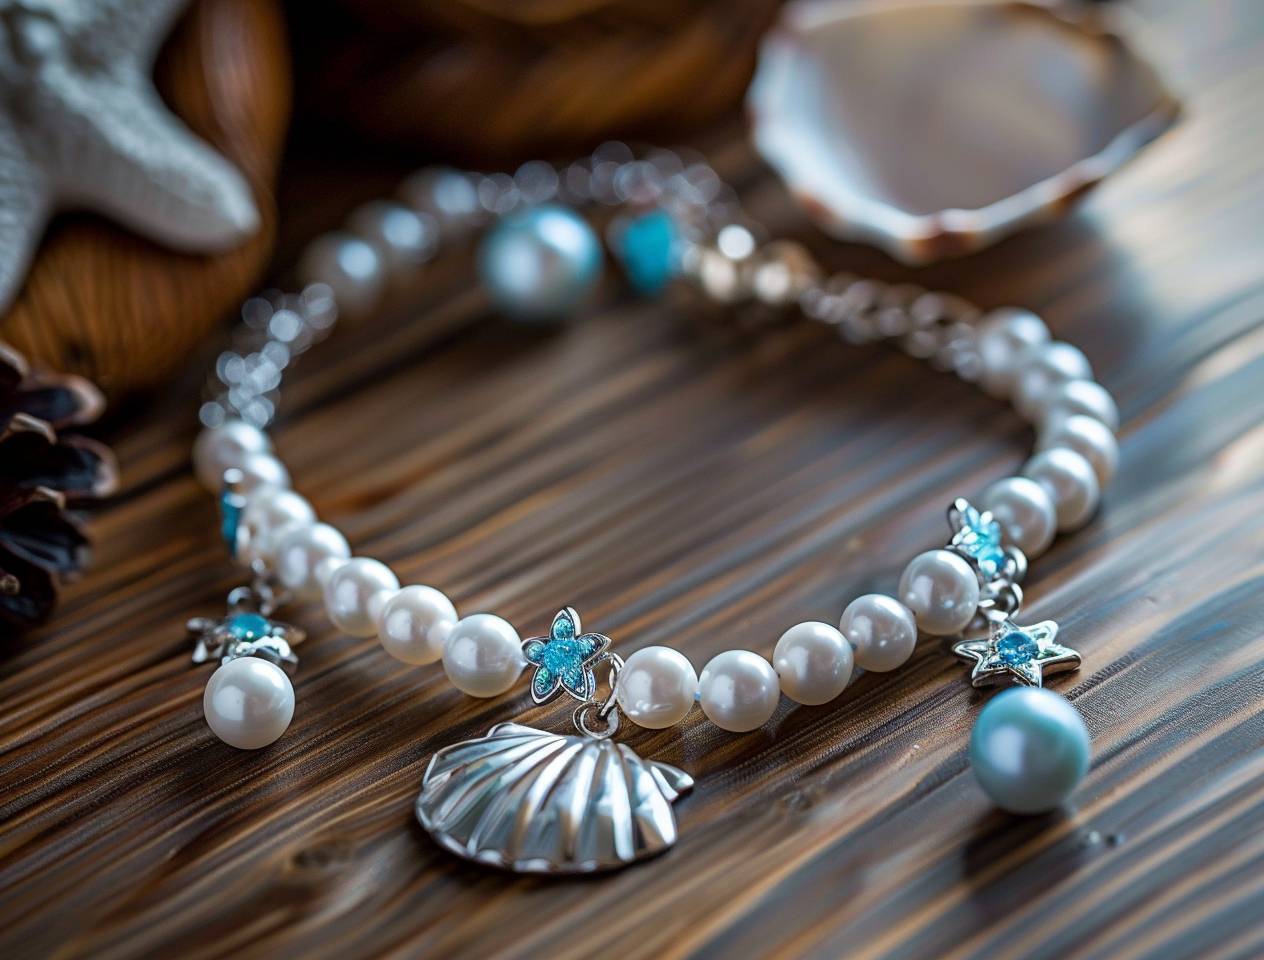 A delicate white pearl bracelet with one blue and silver shell charm, one small star pendant and three pearls in the middle of each chain is a photo taken in the style of an amateur using their phone camera, posted on reddit/ snapchat in 2018.